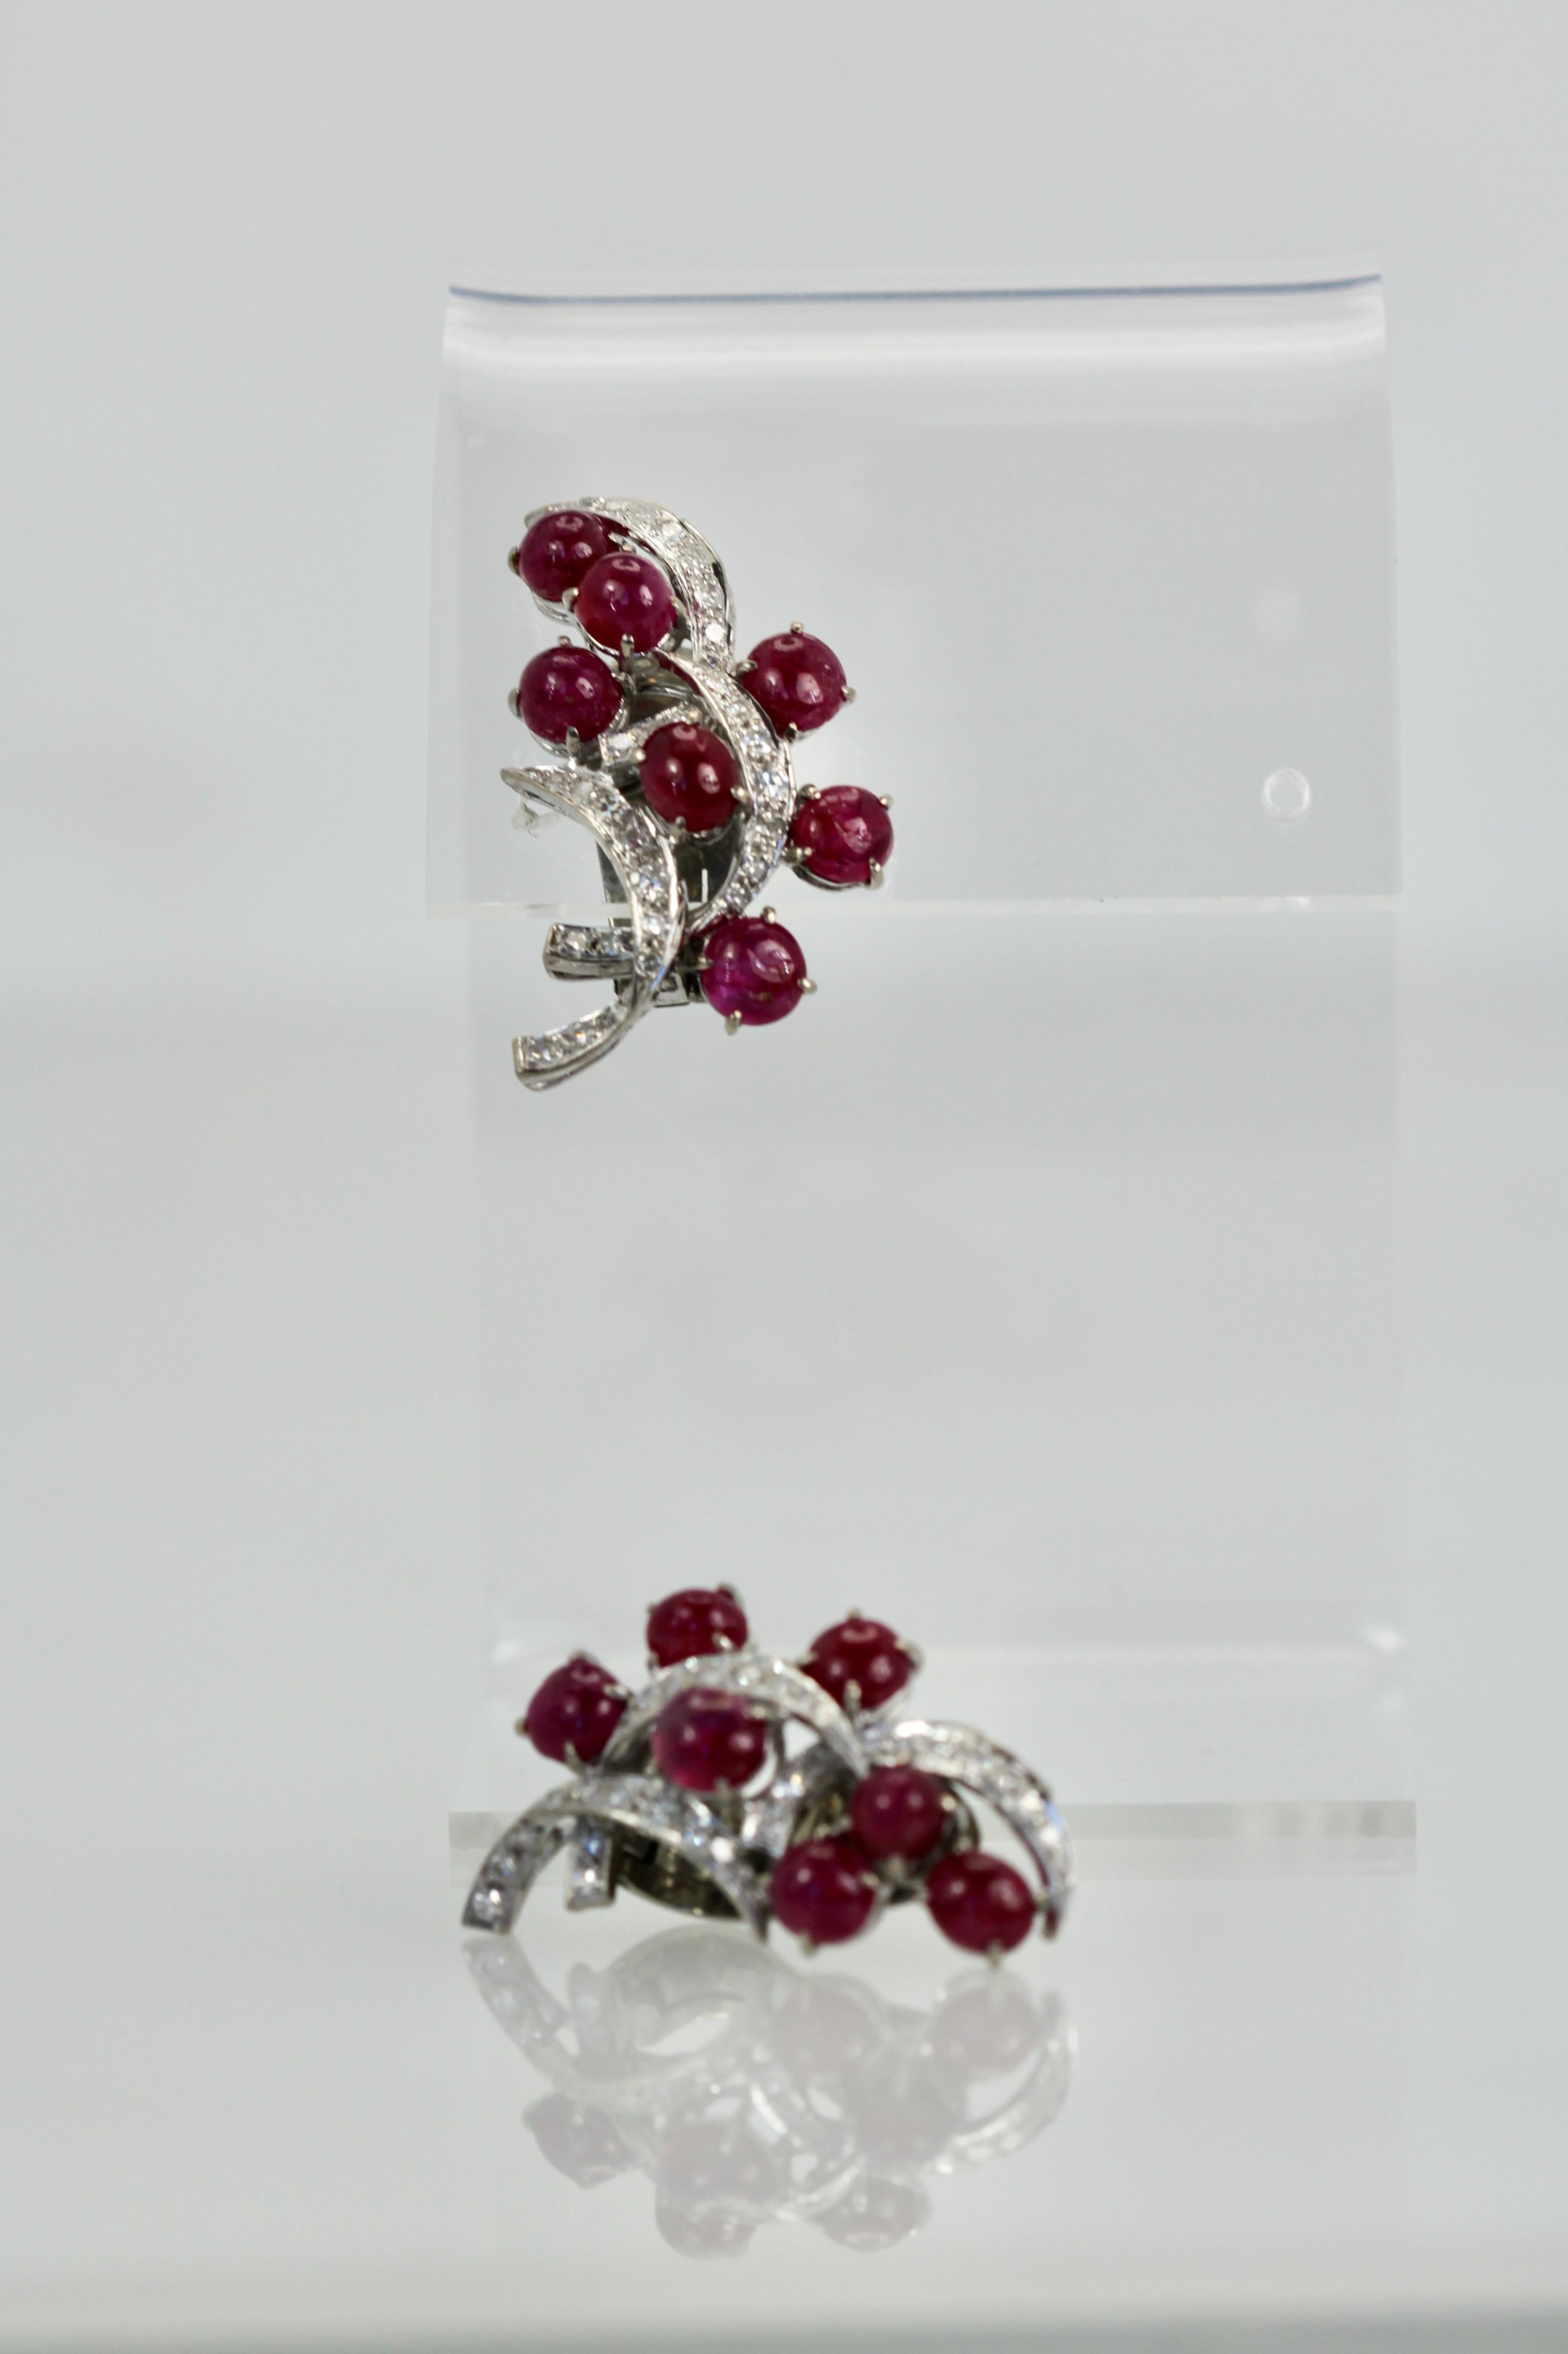 These gorgeous Burma Ruby earrings are made from Burma Cabochon Rubies.  These Rubies are set in Diamond ribbons and have pierced backs posts.  Each Ruby is 3 cm and there are 7 per earring, totaling 14 Rubies.  These weigh in at 14.9 grams.  These